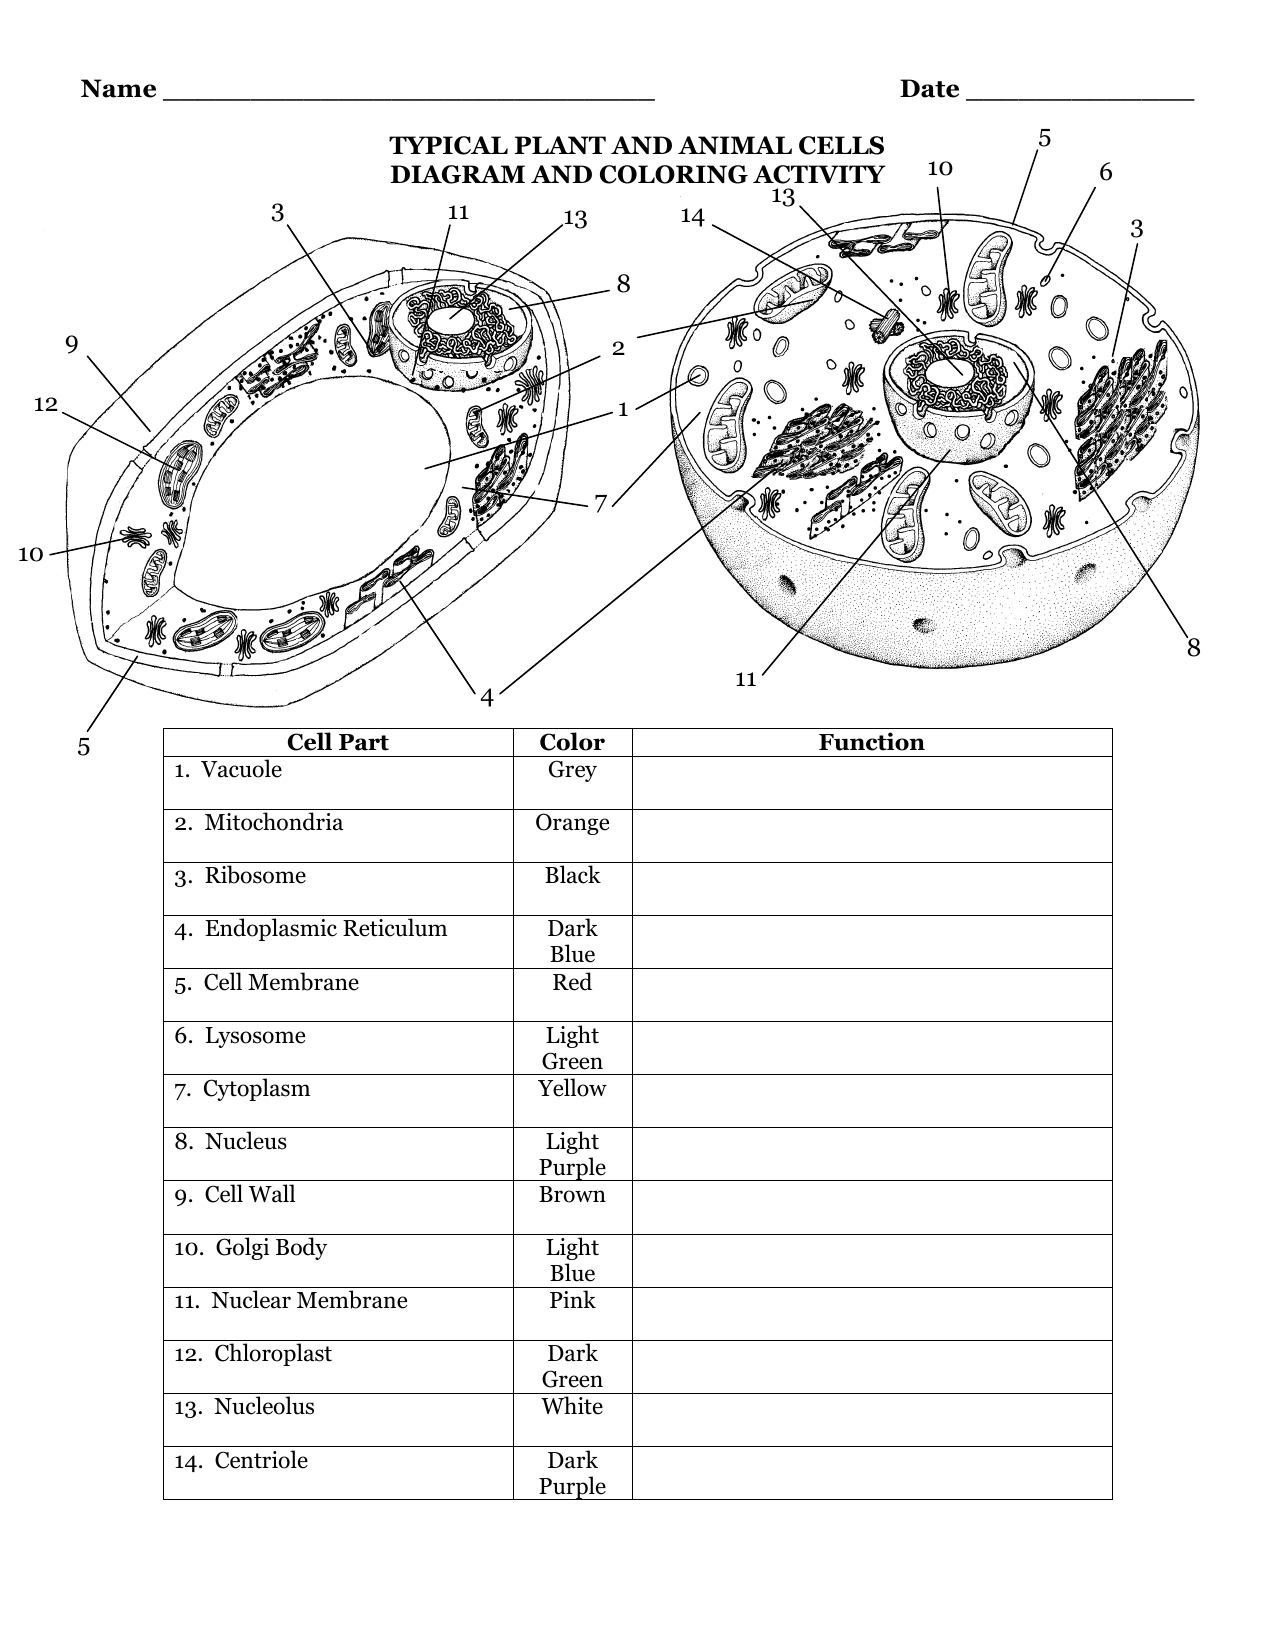 Plant And Animal Cell Diagram Typical Plant And Animal Cells Diagram And Coloring